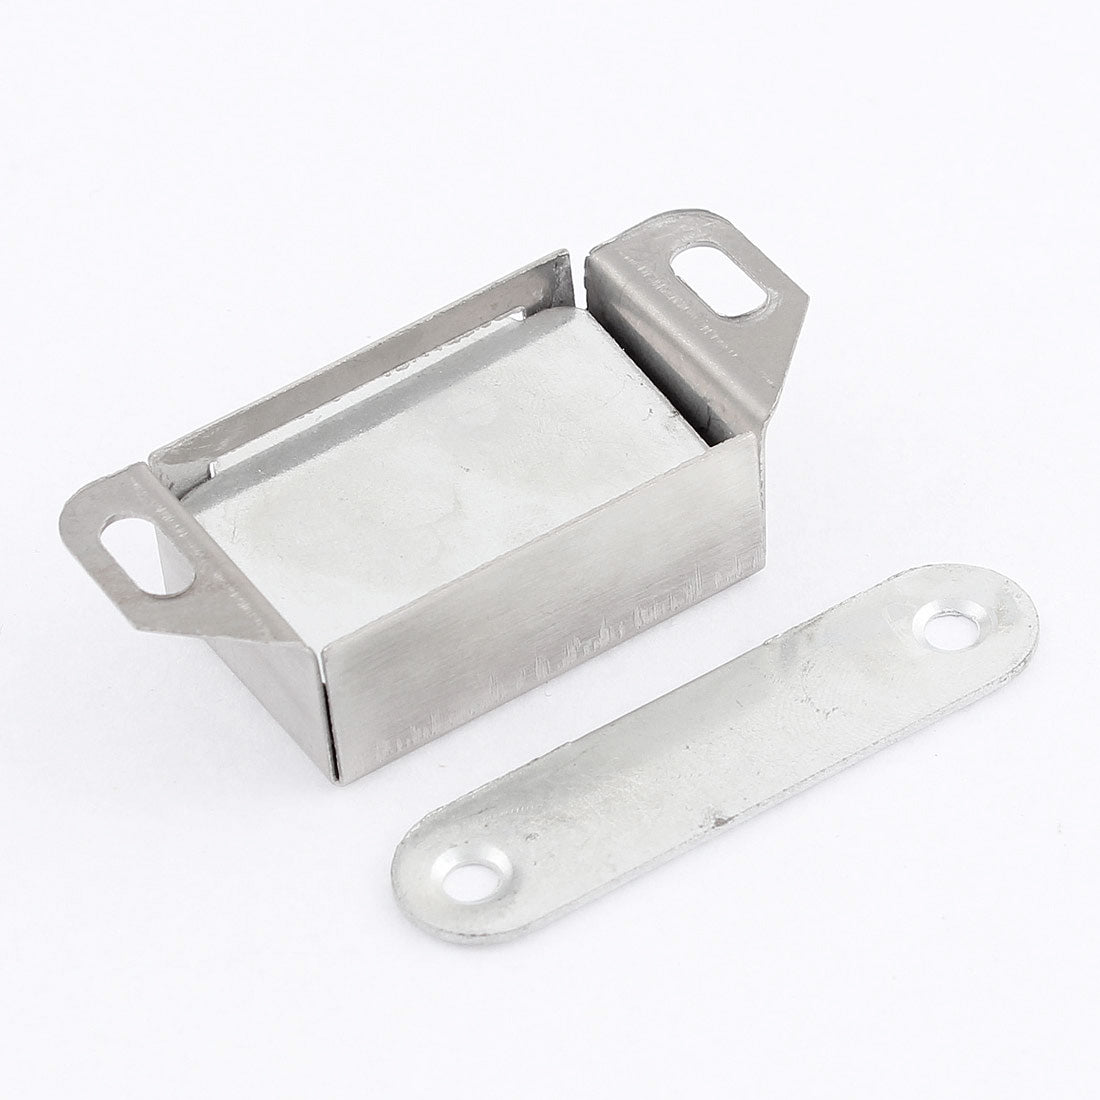 uxcell Uxcell Door Cabinet Cupboards Stainless Steel Magnetic Catch Stopper Holder Silver Tone